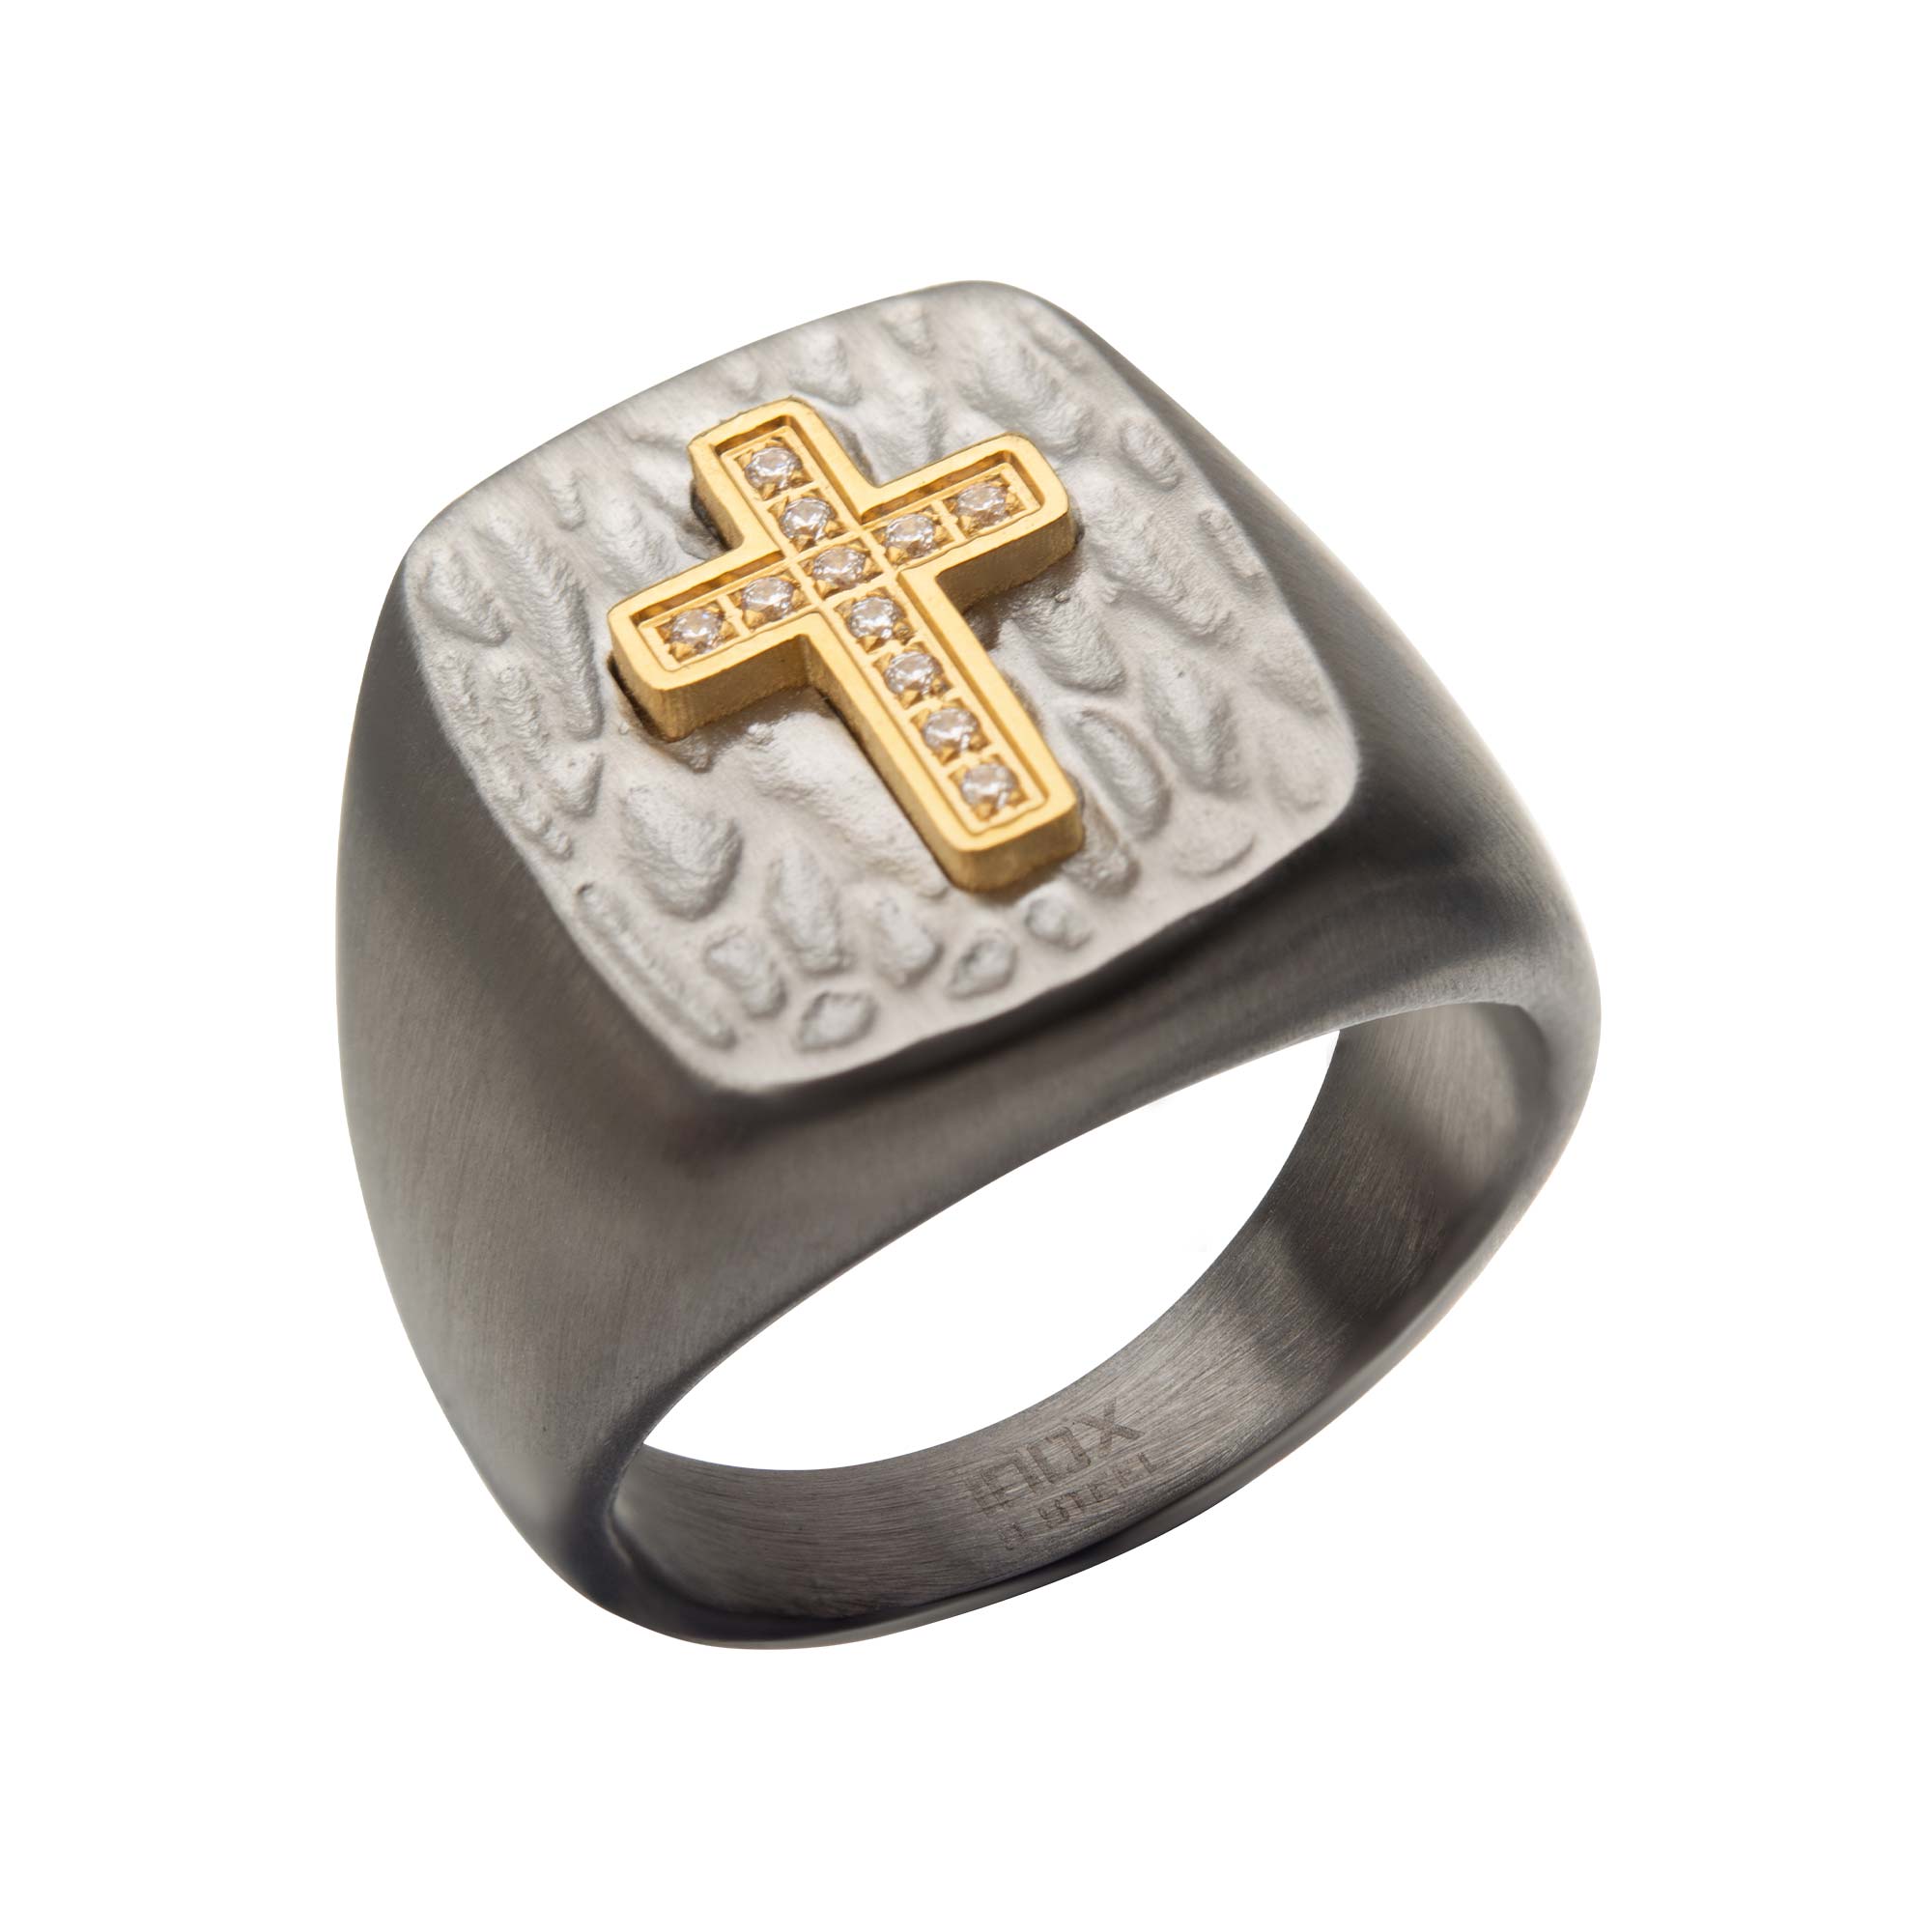 Gold Plated Cross with Clear CZs on Steel Hammered Signet Rings Carroll / Ochs Jewelers Monroe, MI